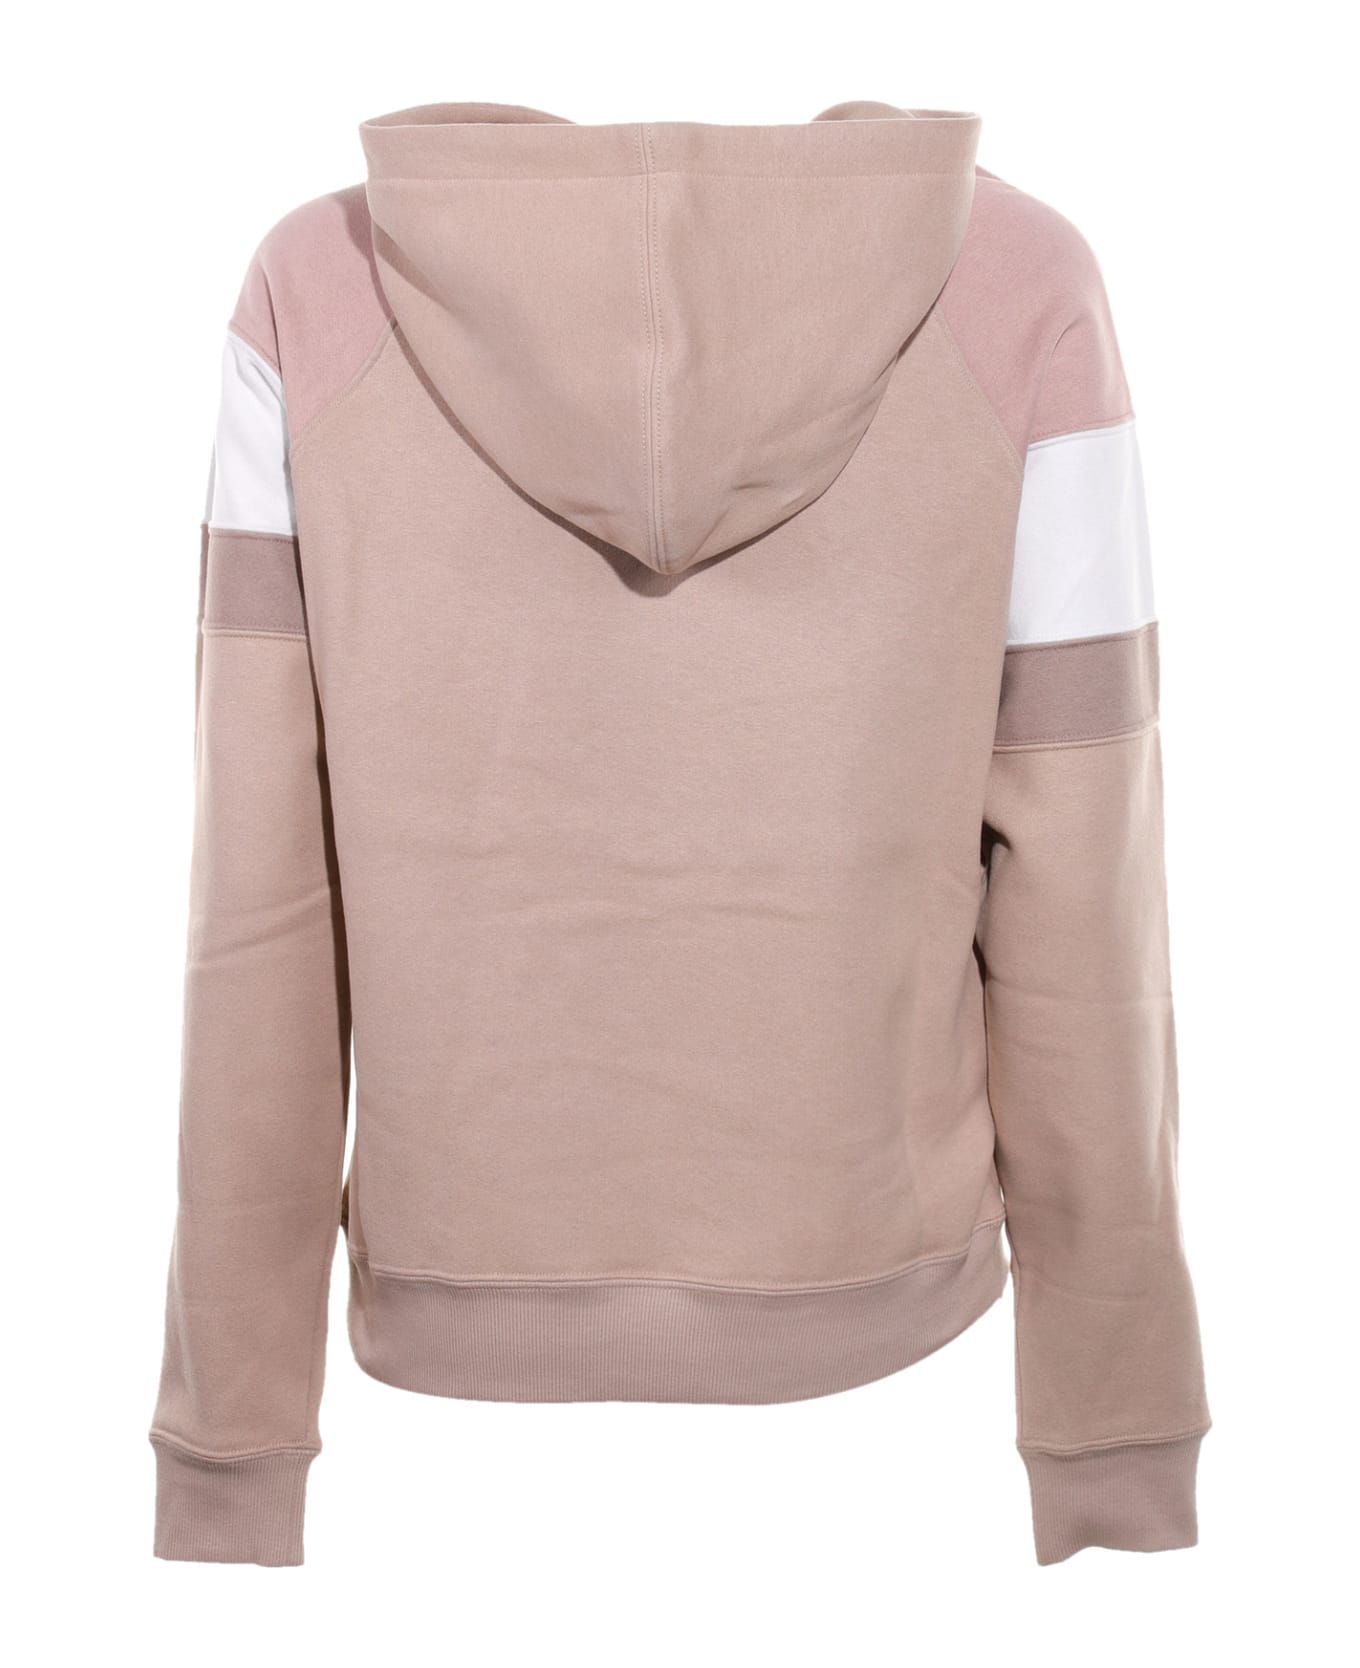 Saint Laurent Sweatshirt With Hood And Embroidered Logo - NUDE ROSE